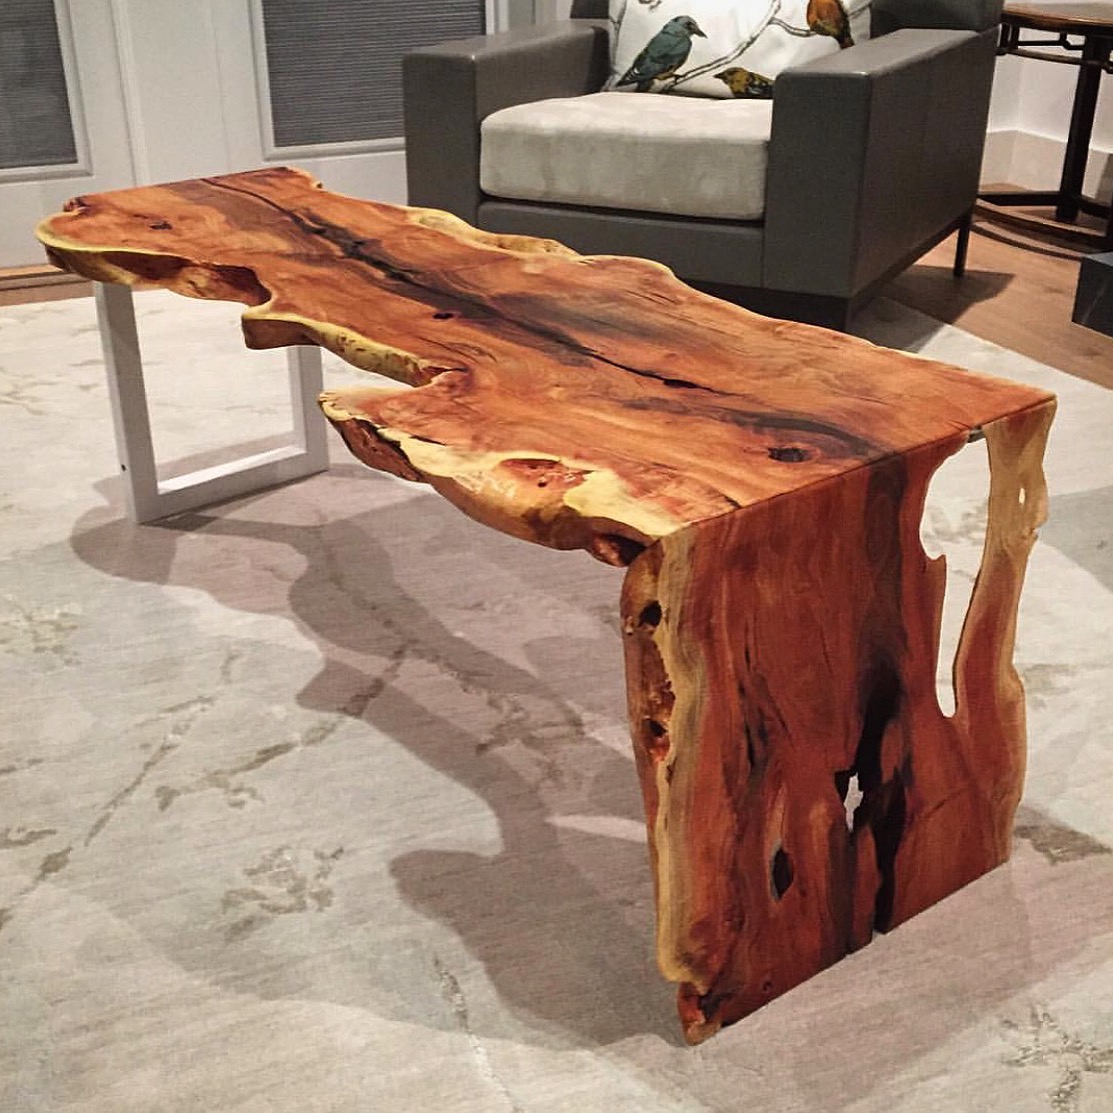 Tropical Exotic Hardwoods: How about this awesome live edge Carob table ...